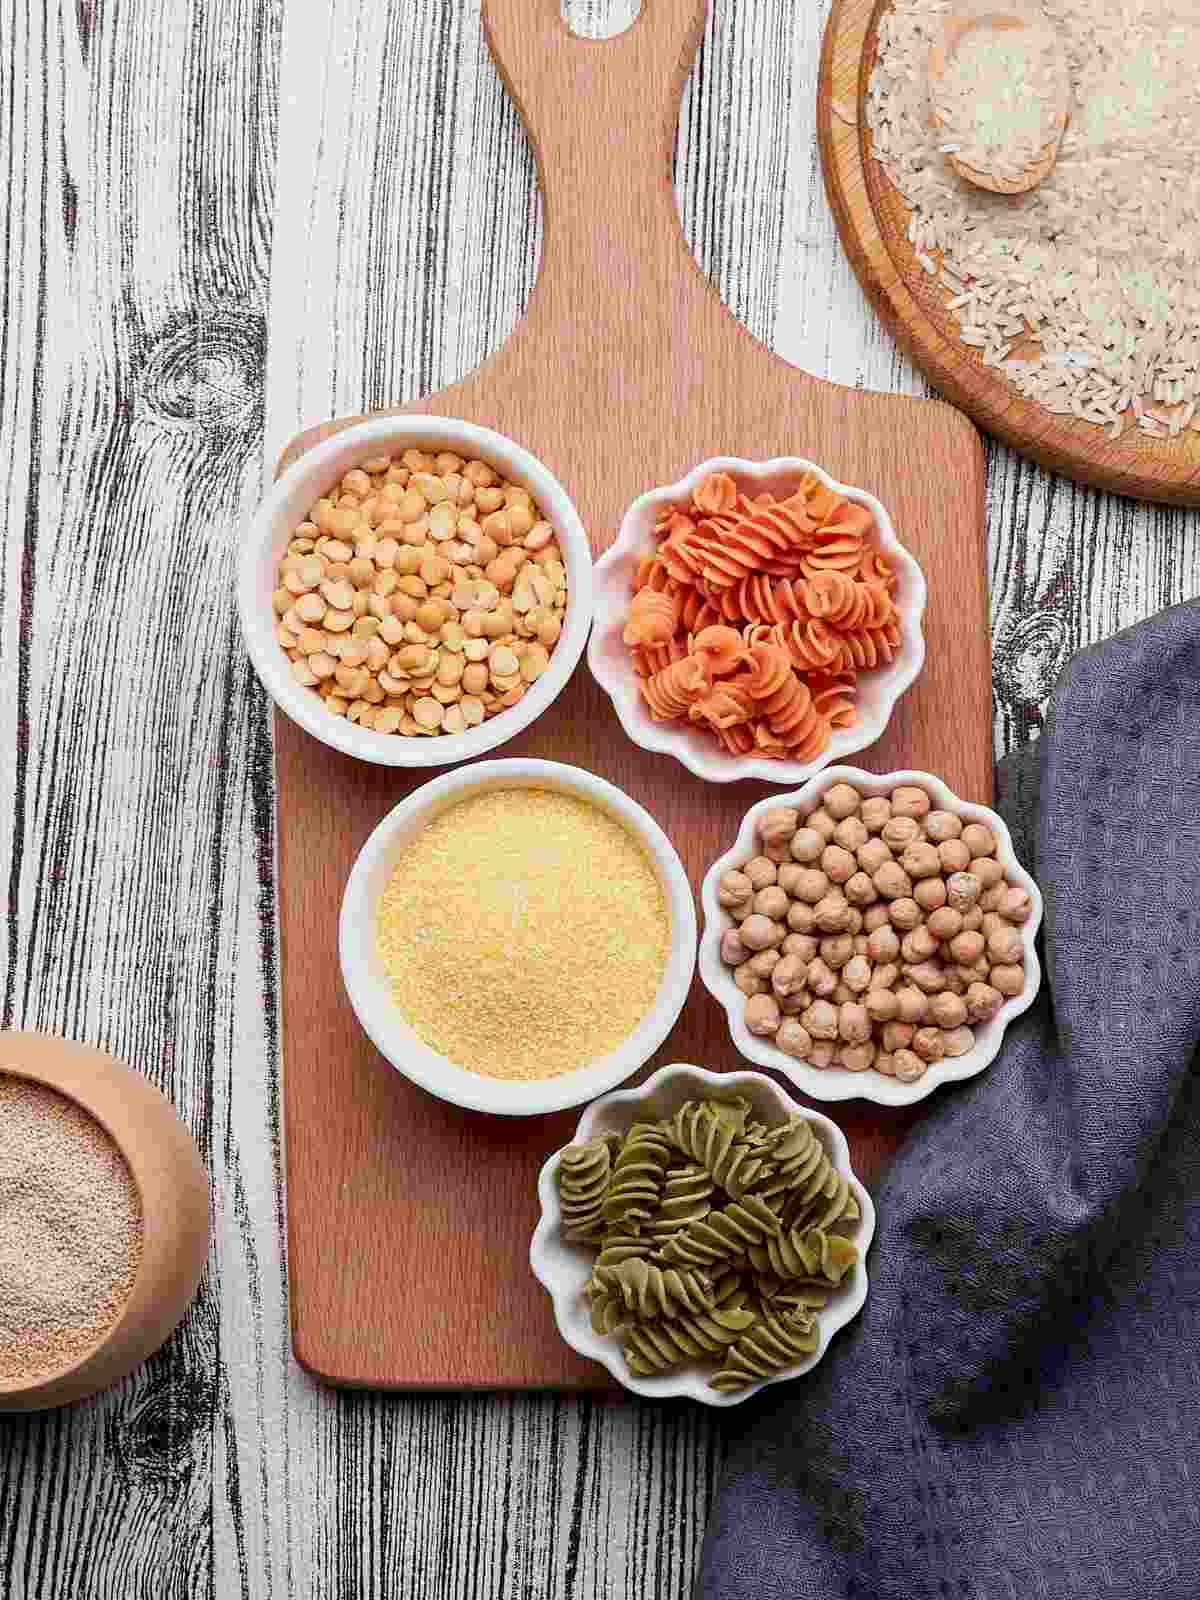 What Is the Lectin-Free Diet